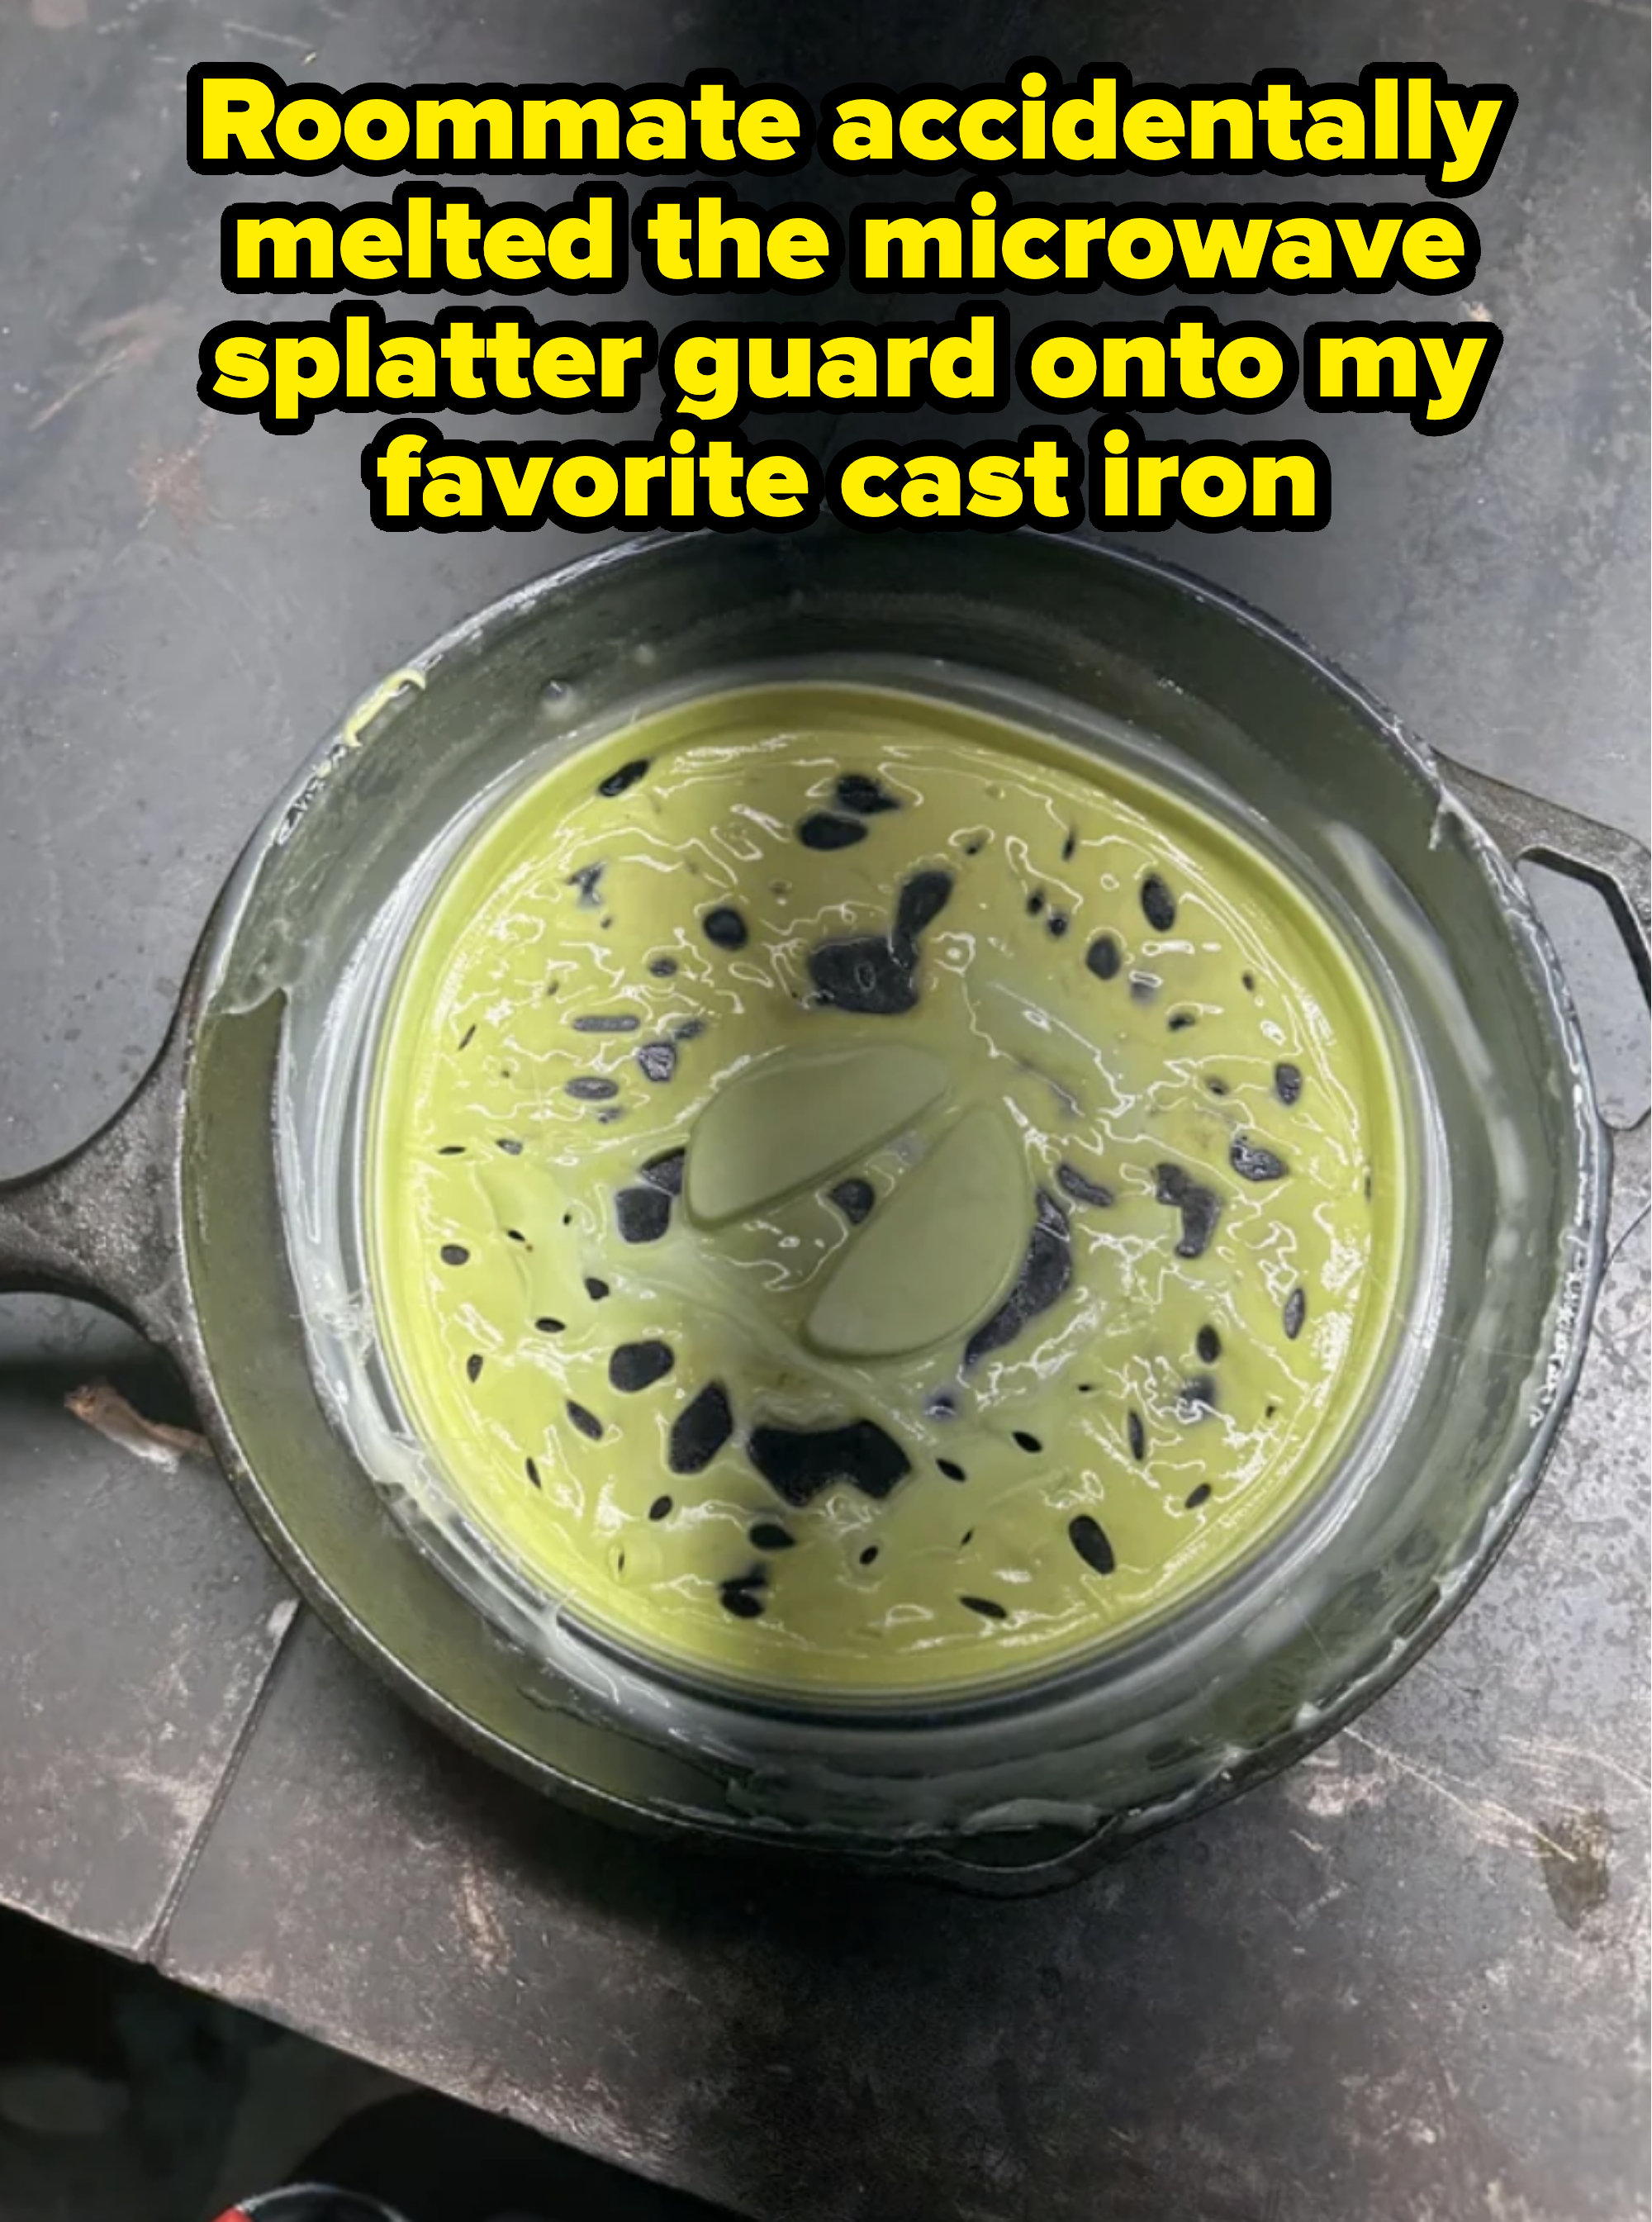 microwave splatter guard melted into a cast iron